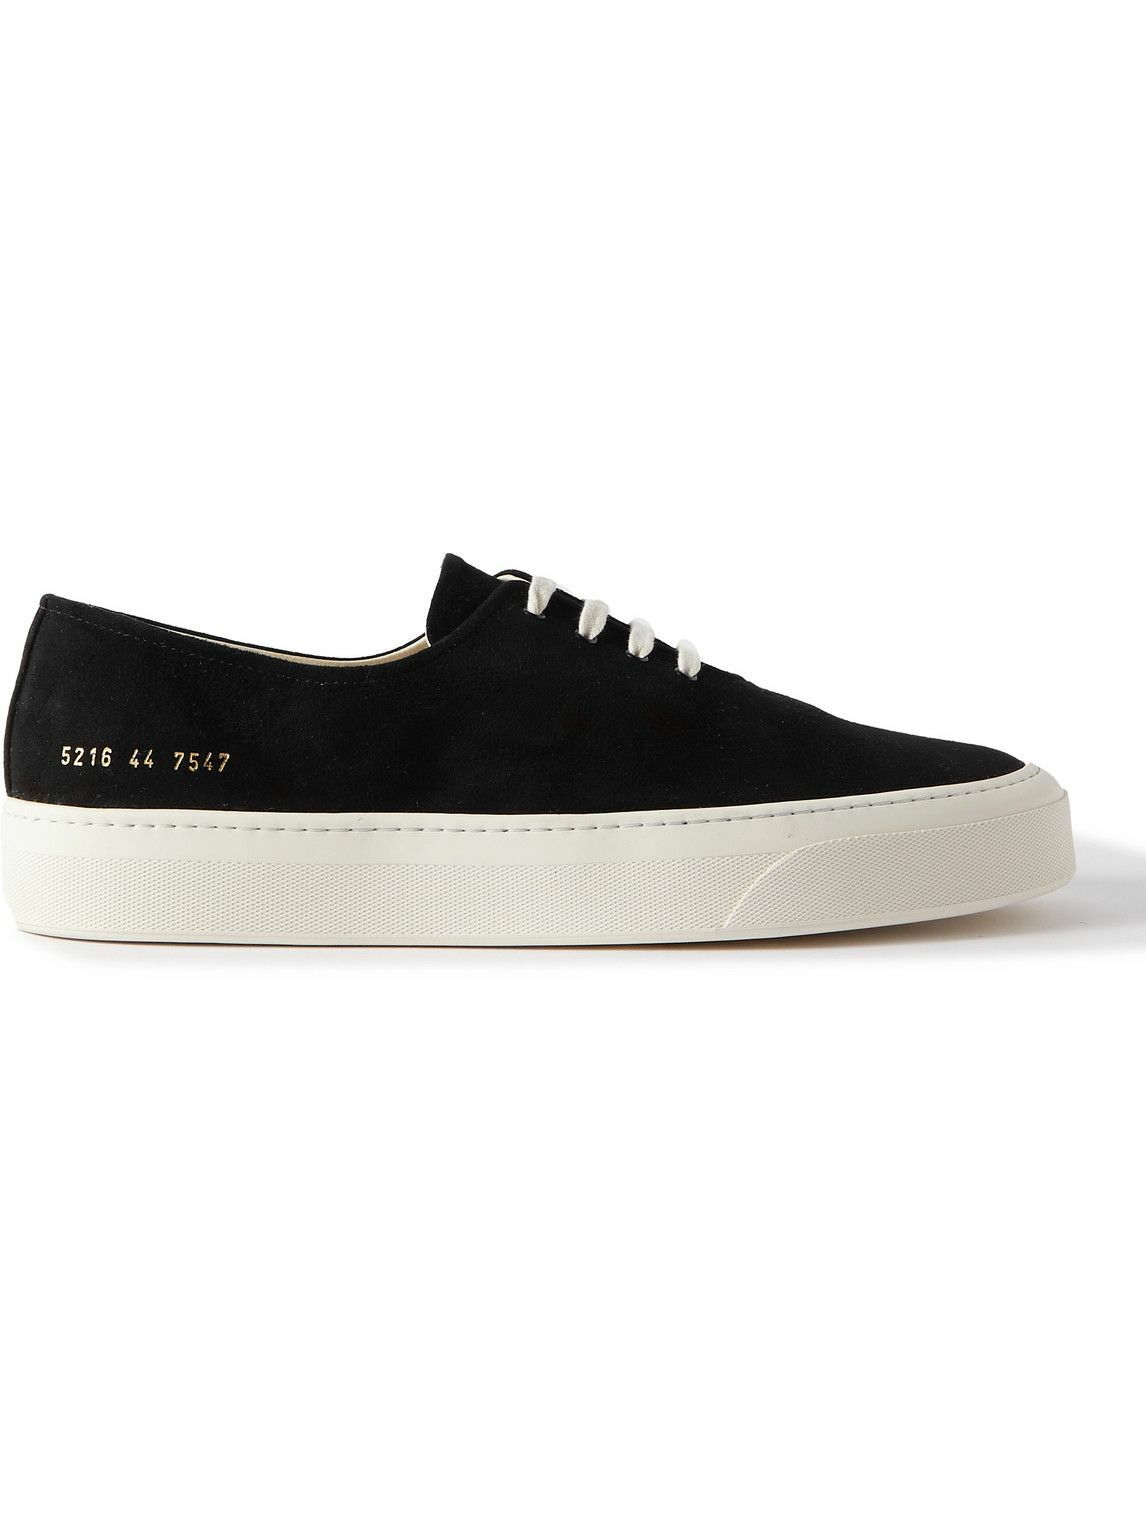 Common Projects - Suede Sneakers - Black Common Projects